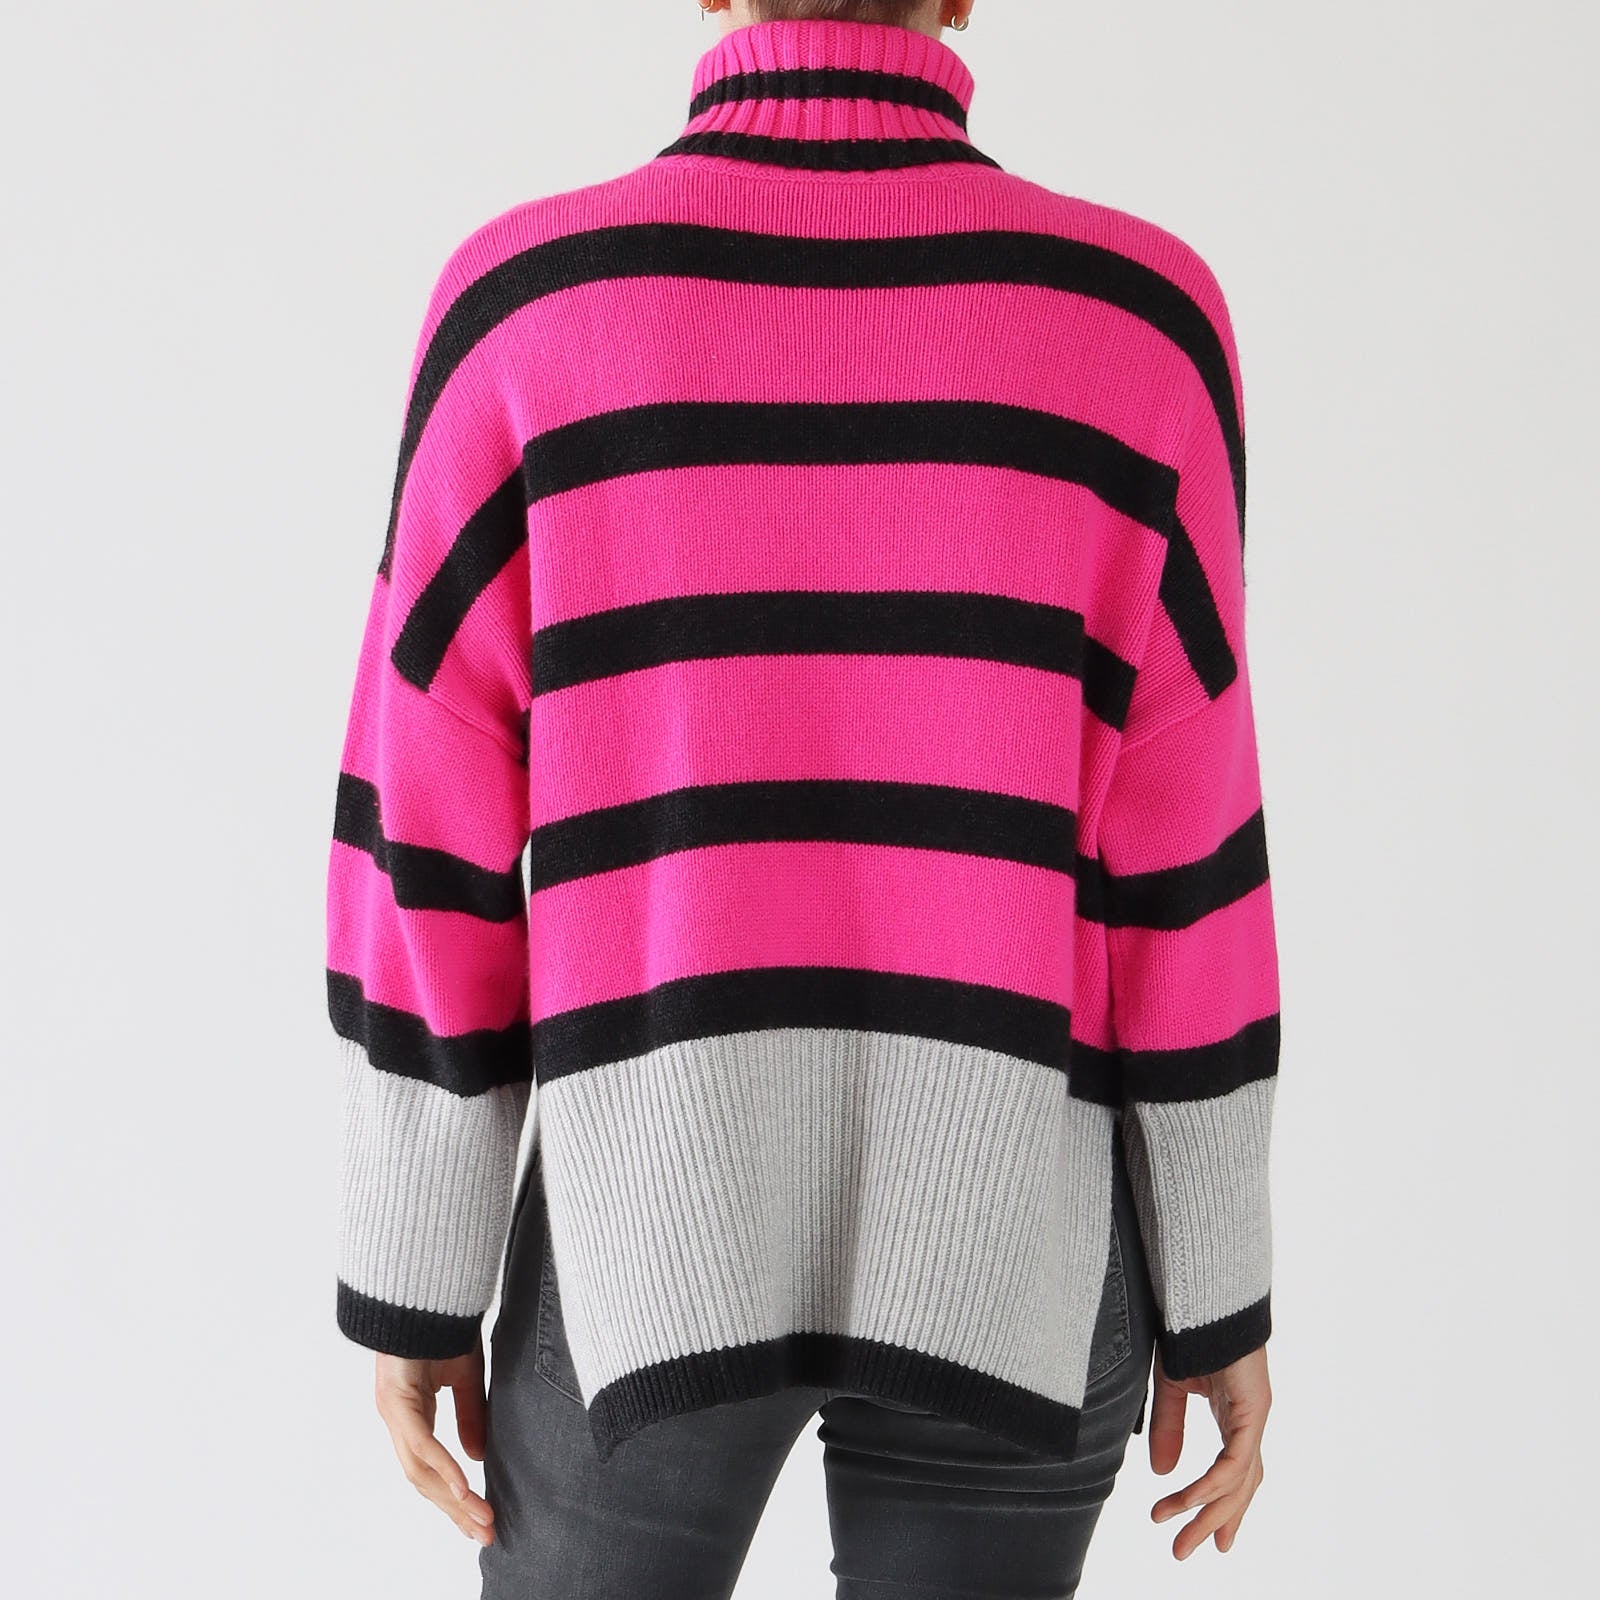 Hyper Pink & Anthracite Striped Sweater